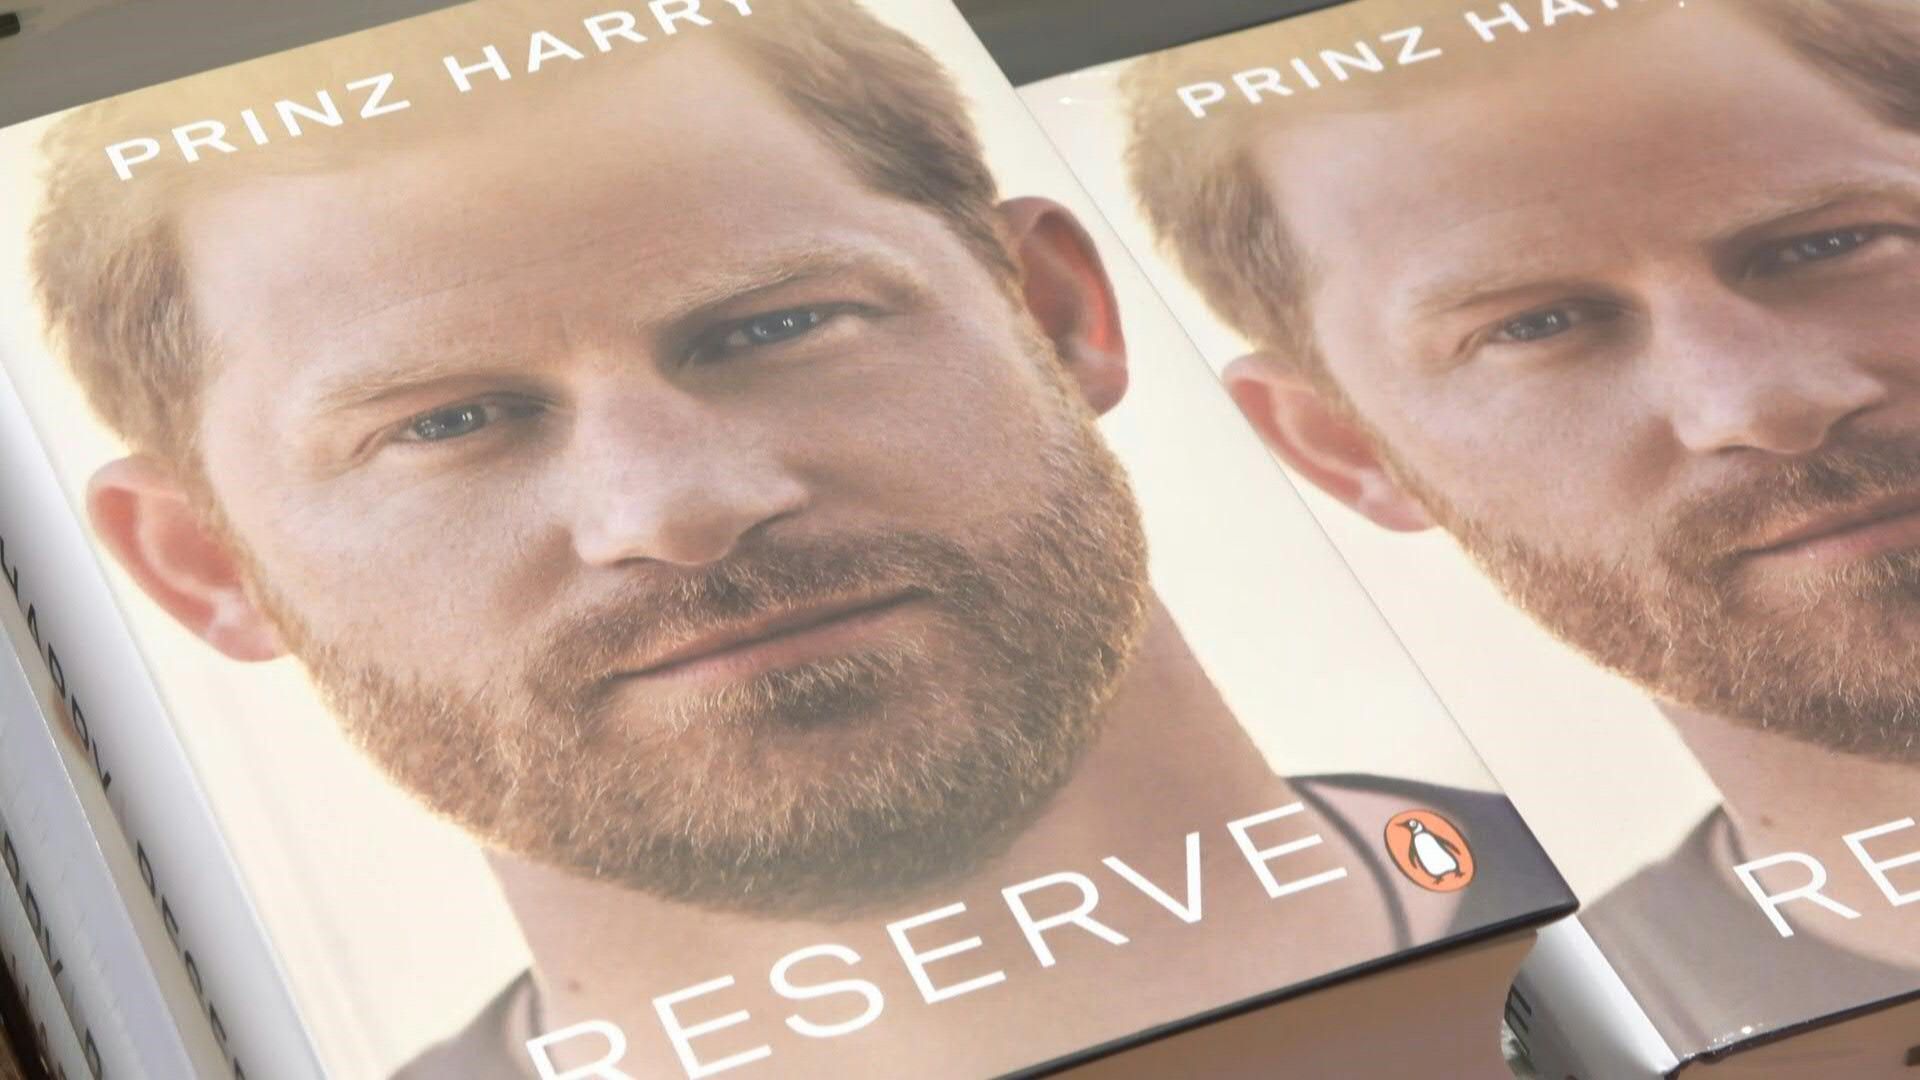 Prince Harry's scandalous autobiography is now on sale worldwide